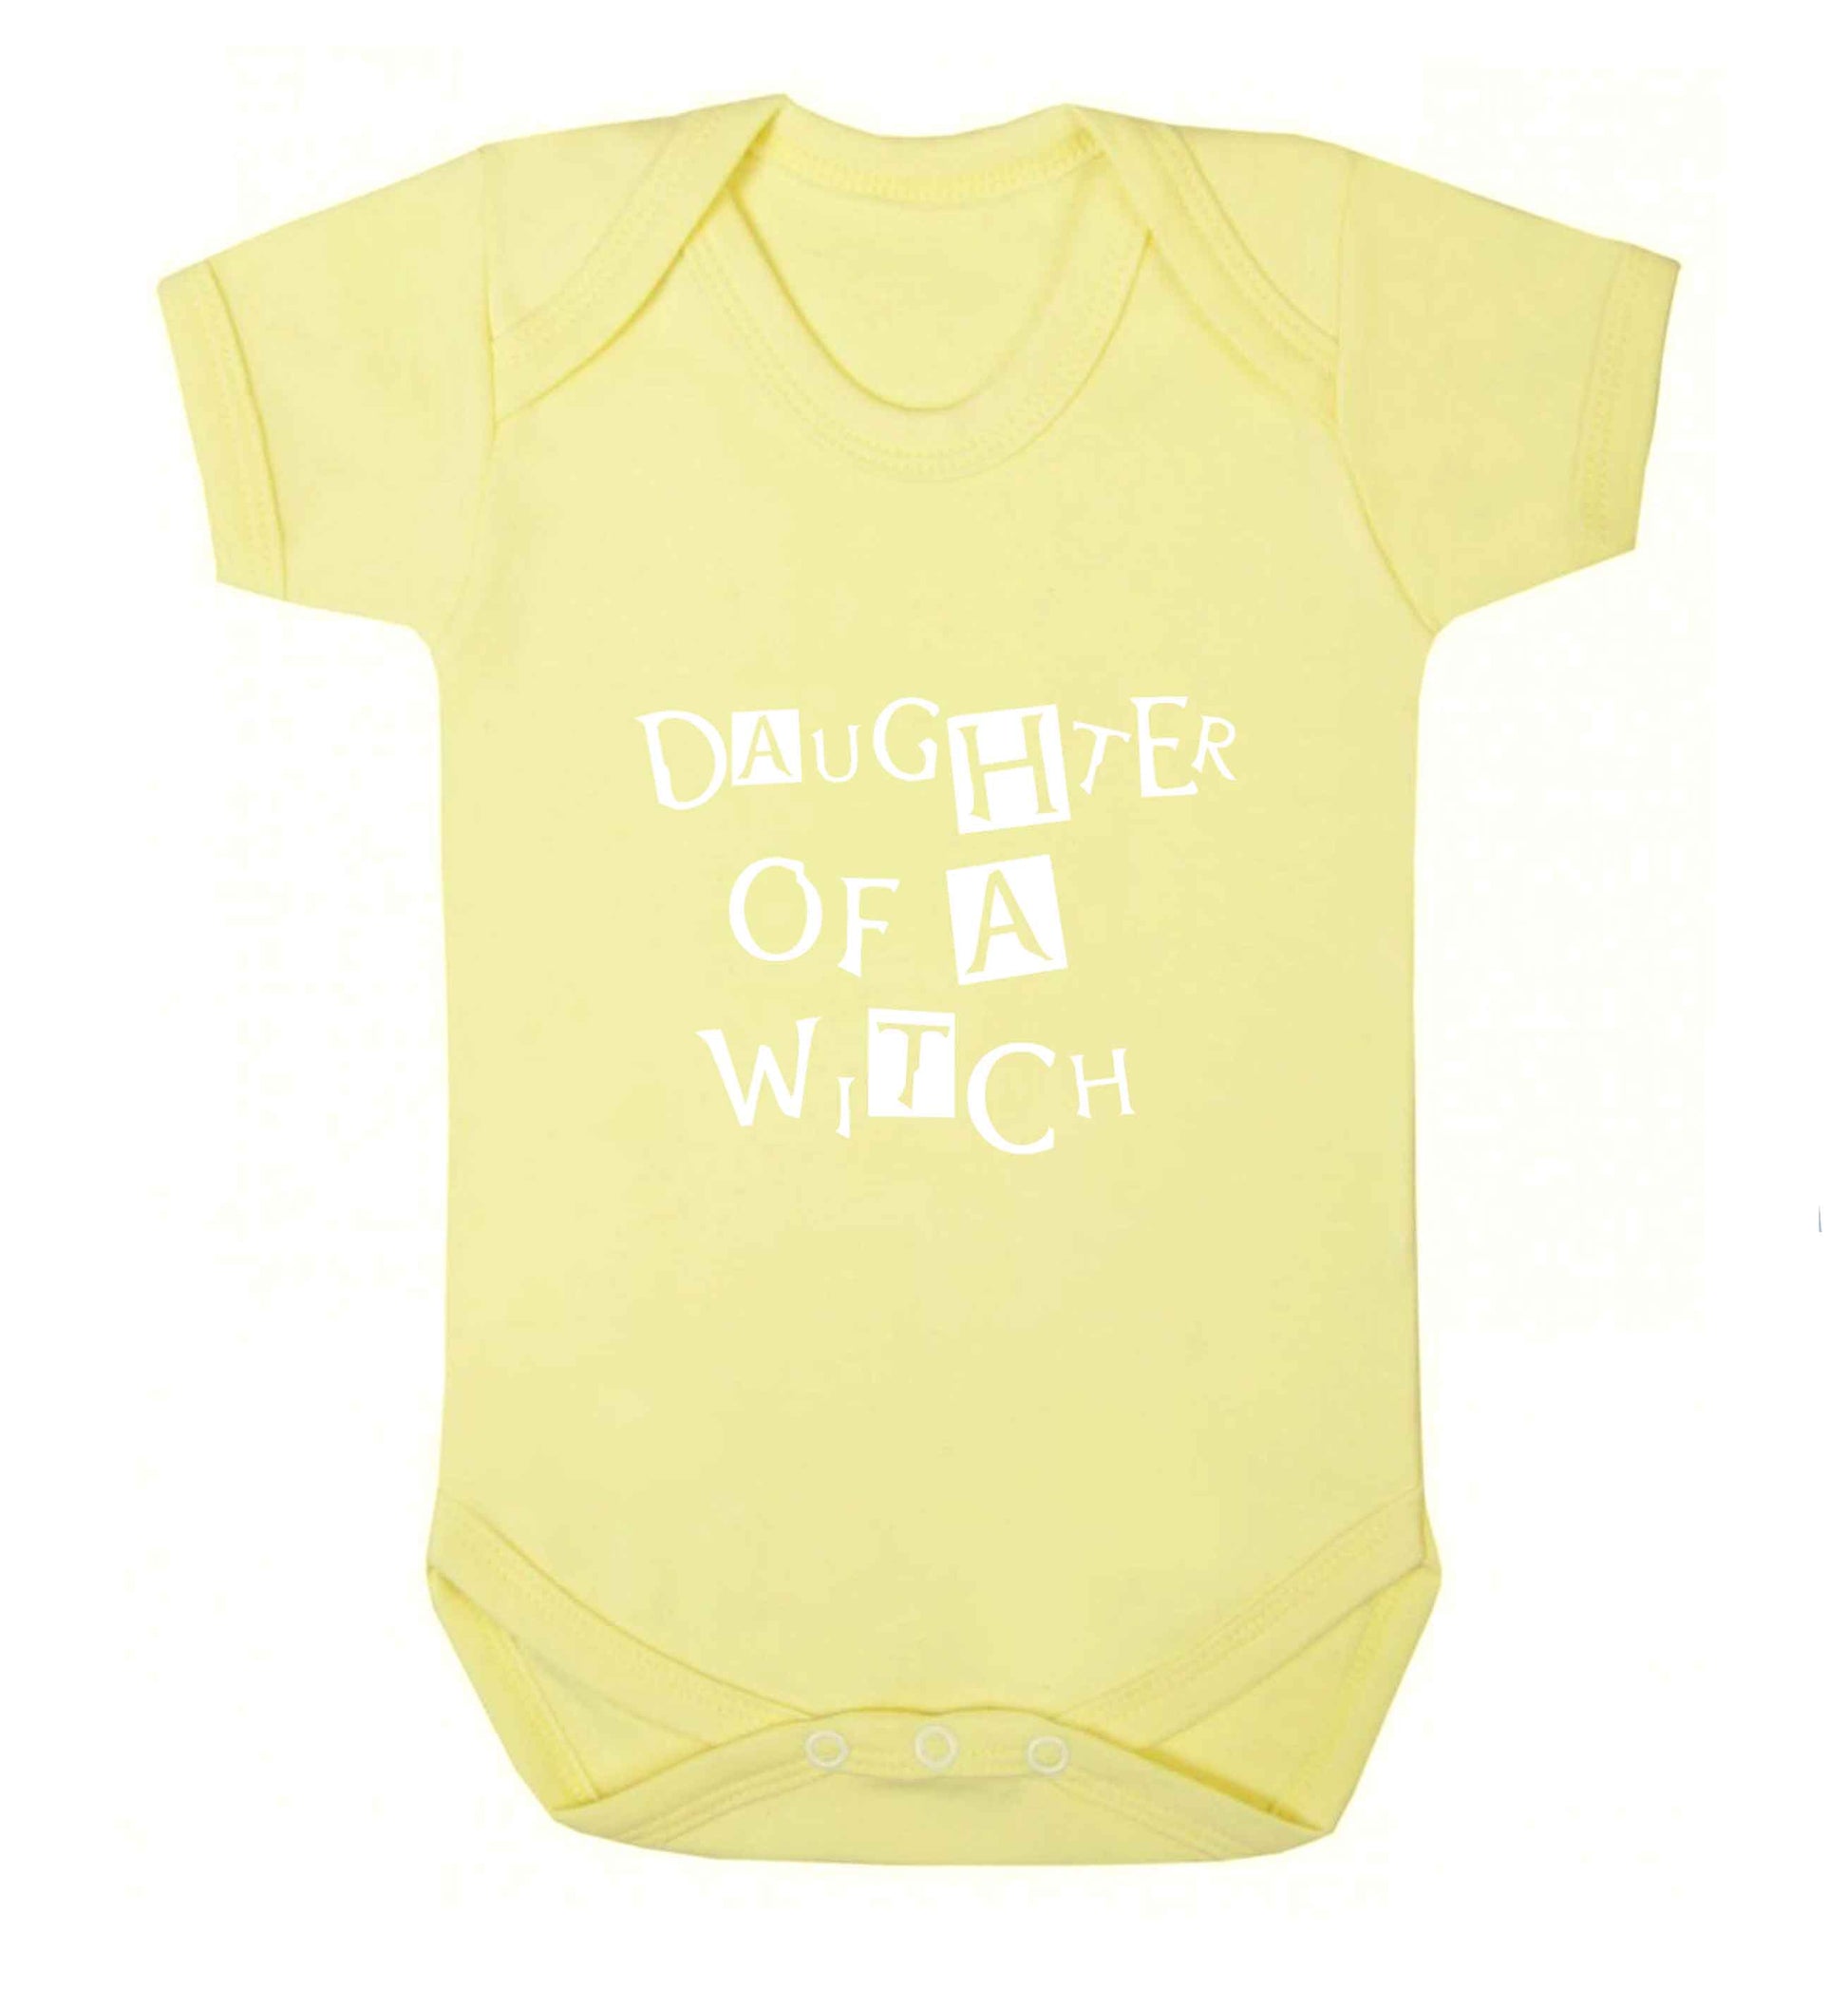 Daughter of a witch baby vest pale yellow 18-24 months